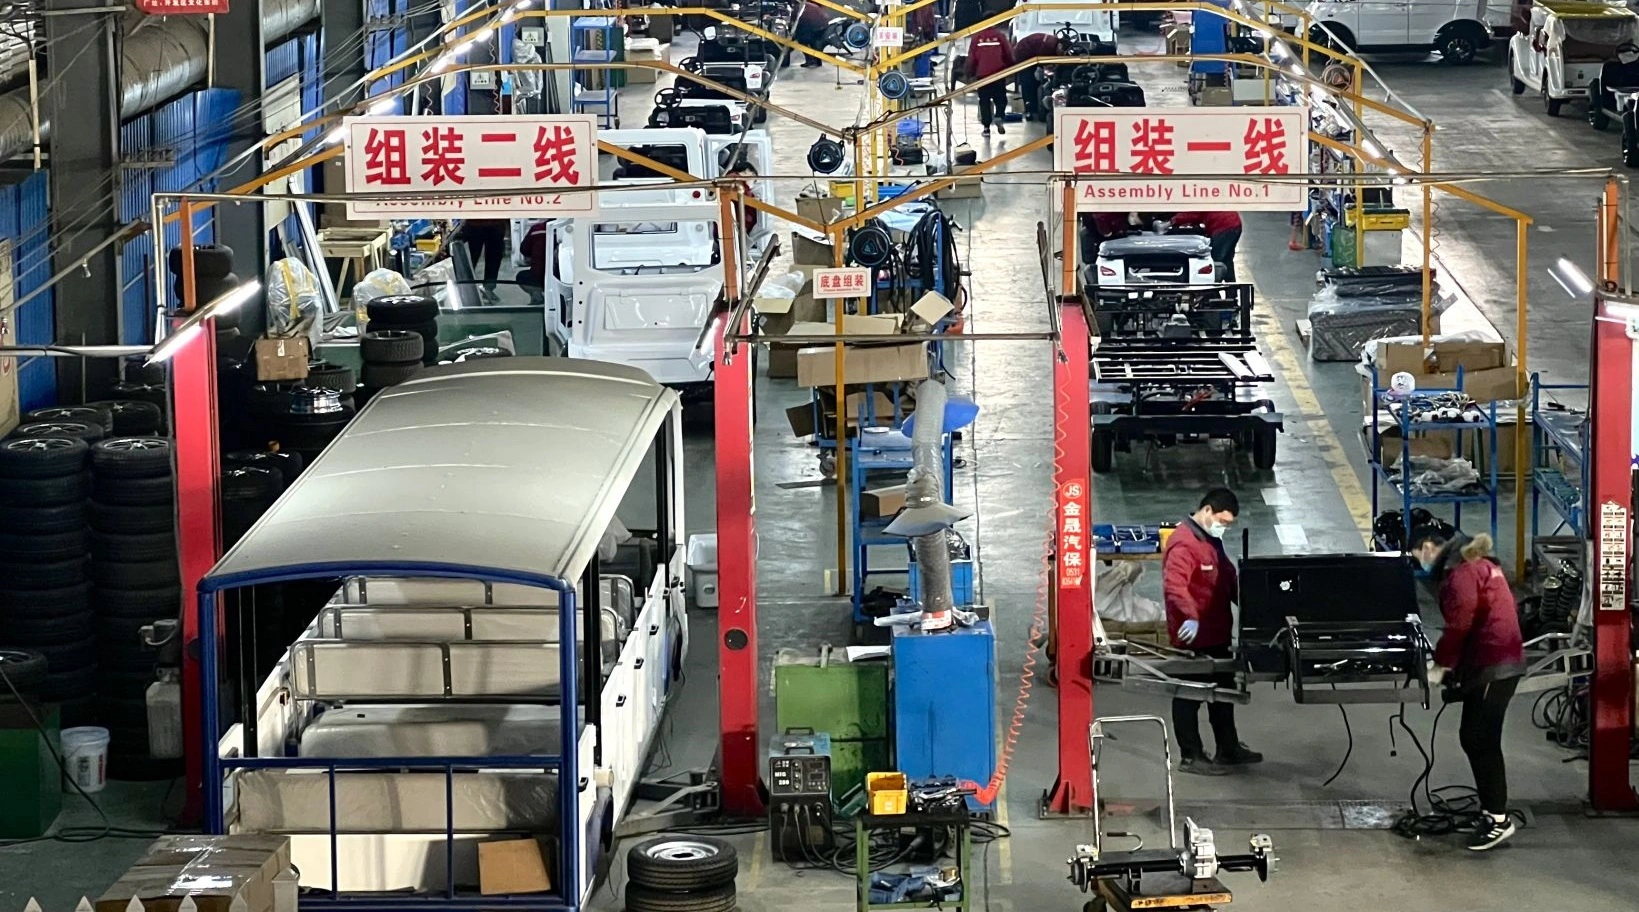 Shandong Haike: the Production Line is Fully Open for Orders